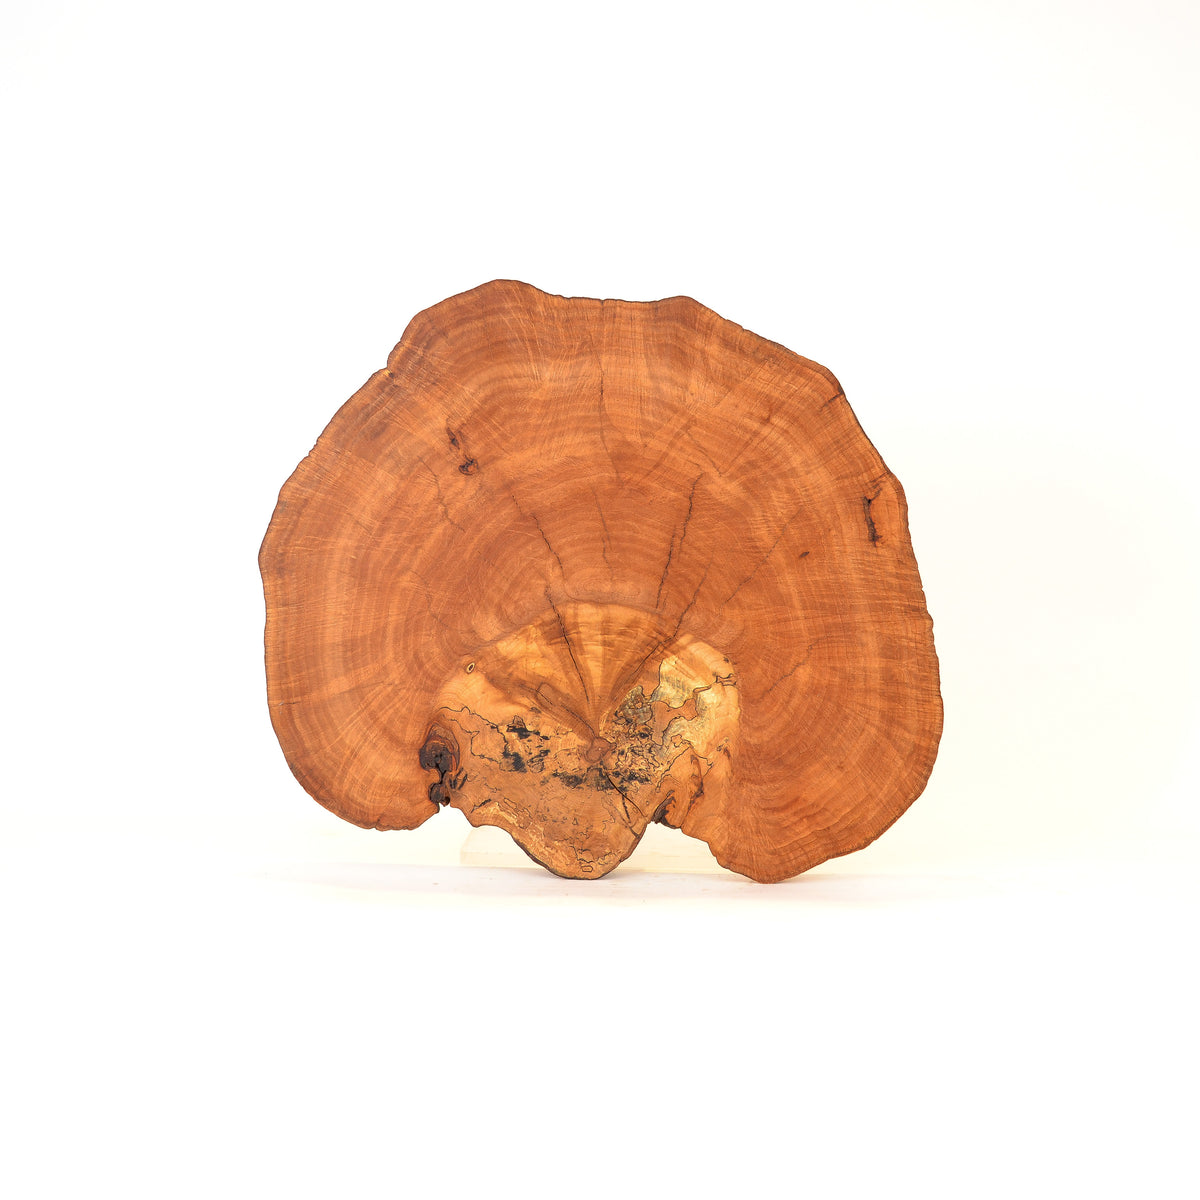 Elm Burl Serving Board: One of a Kind Rare